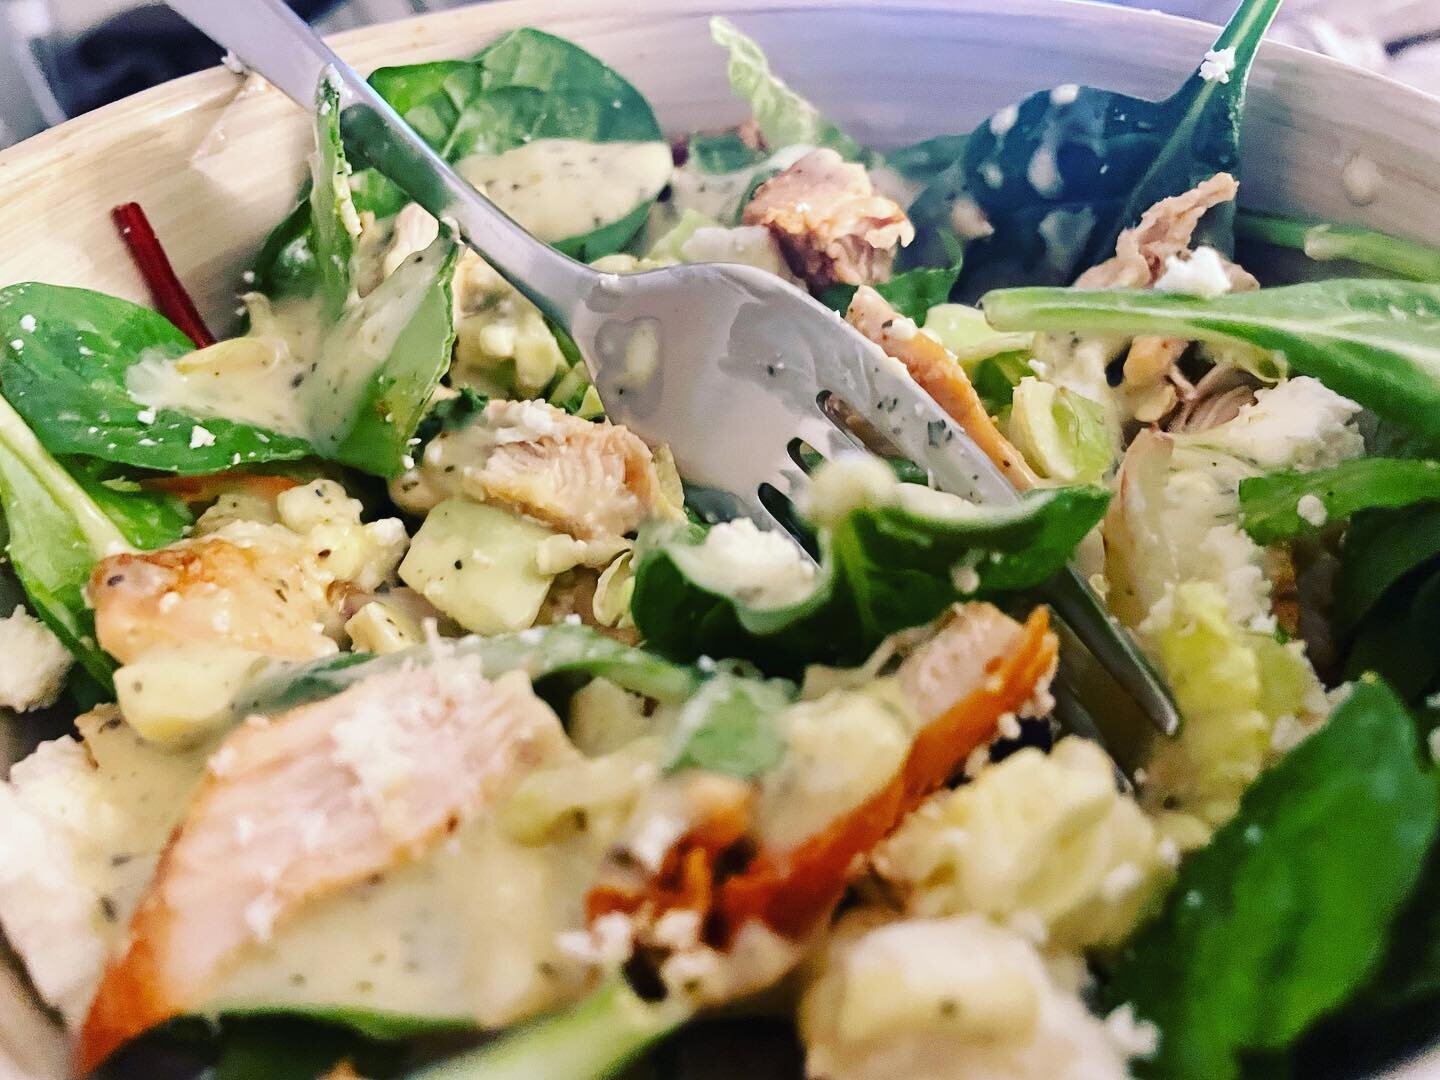 A hearty salad with baby spinach, feta cheese, fresh romaine and arugula, grilled chicken breasts and a healthy cilantro lime dressing 🤤🔥💪🏾 #salad #hearty #nutrientdense #healthy #weightloss #proteinrich #nutrition #veggies #protein #missionfit